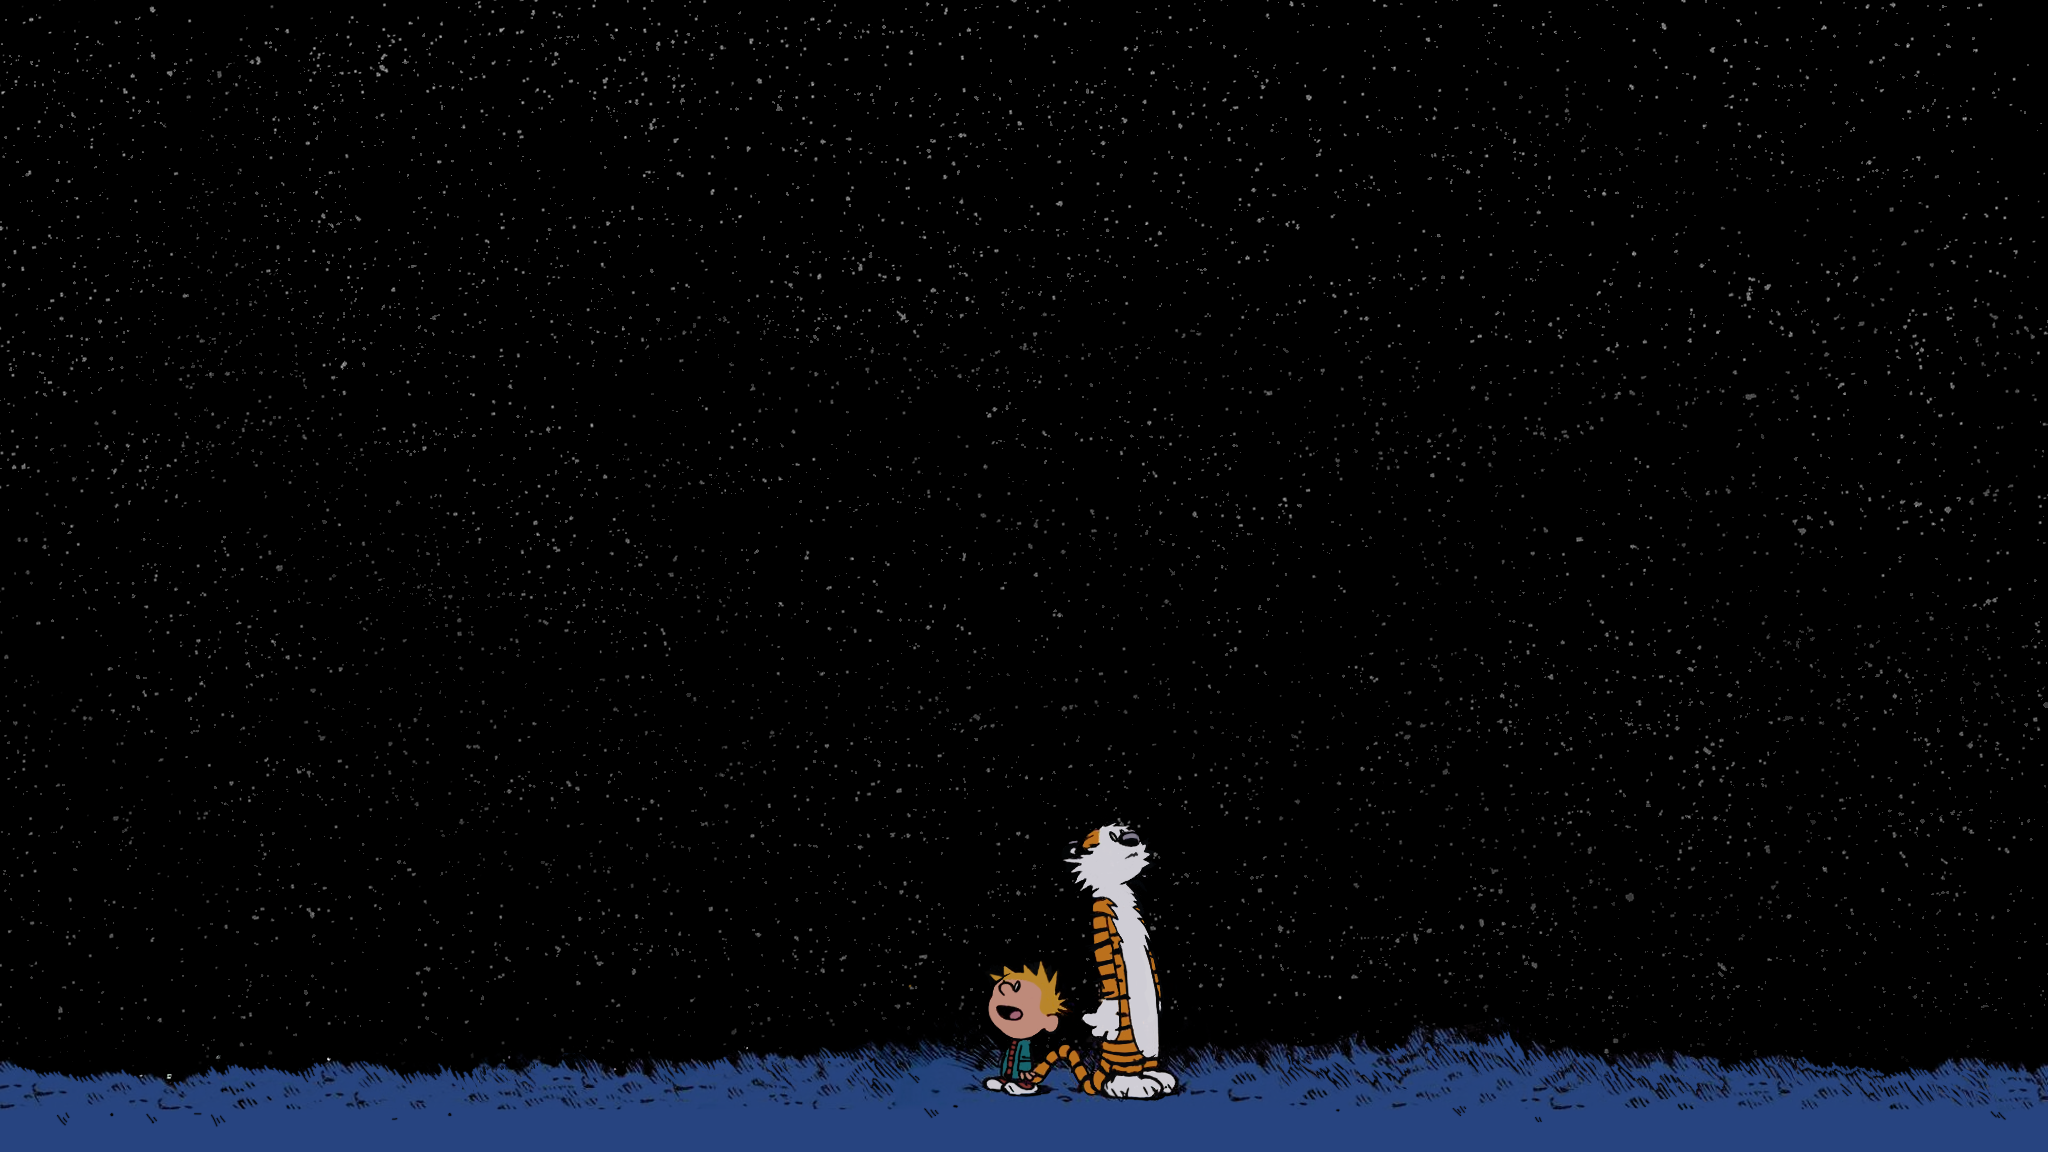 81 Calvin & Hobbes wallpapers optimized for 1920x1080 pics